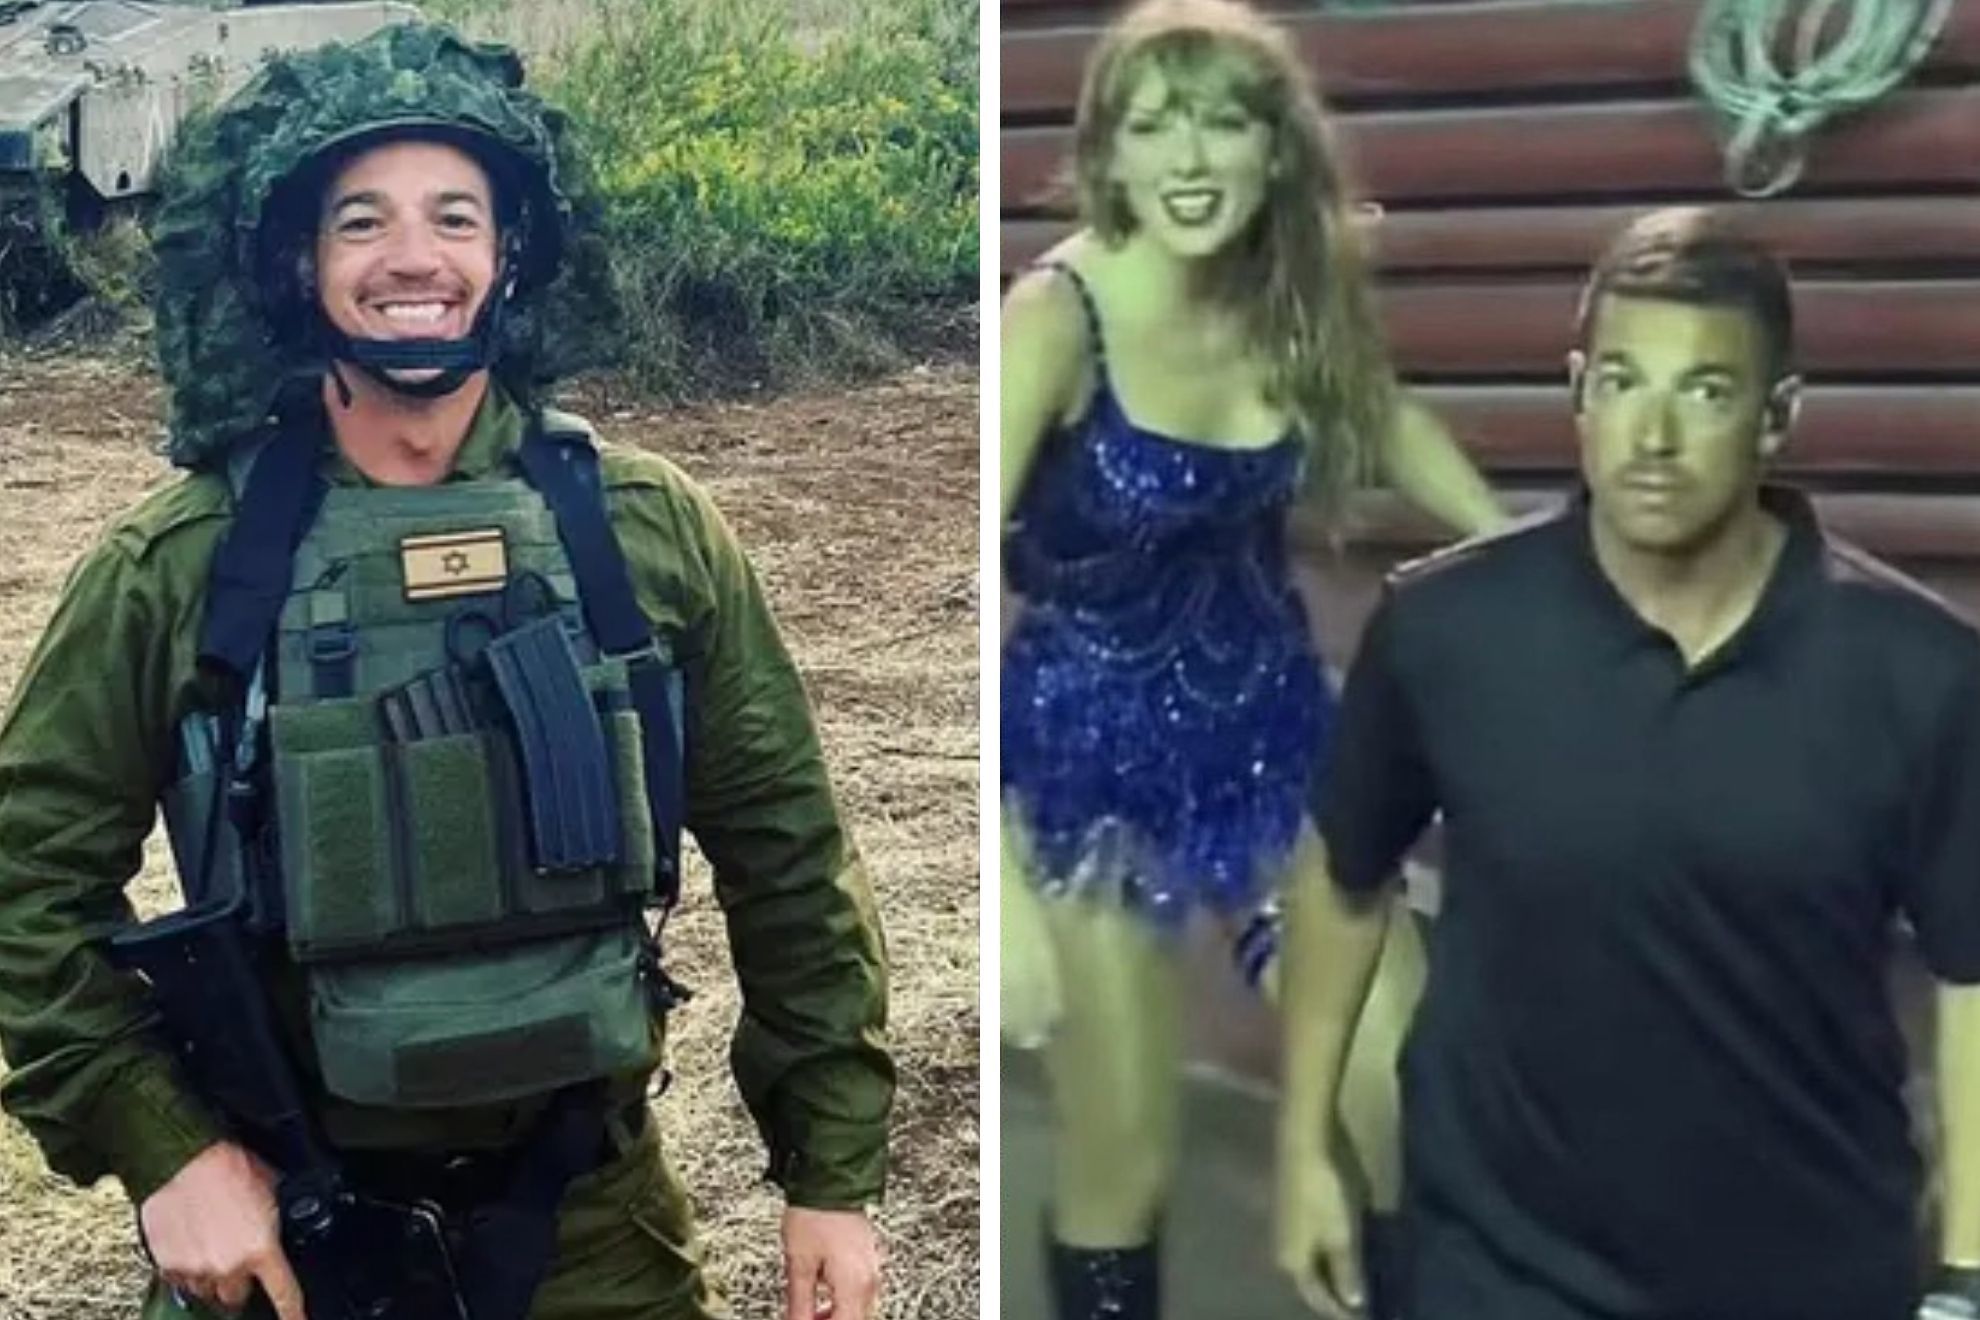 Security guard who went viral for protecting Taylor Swift joins Israeli military